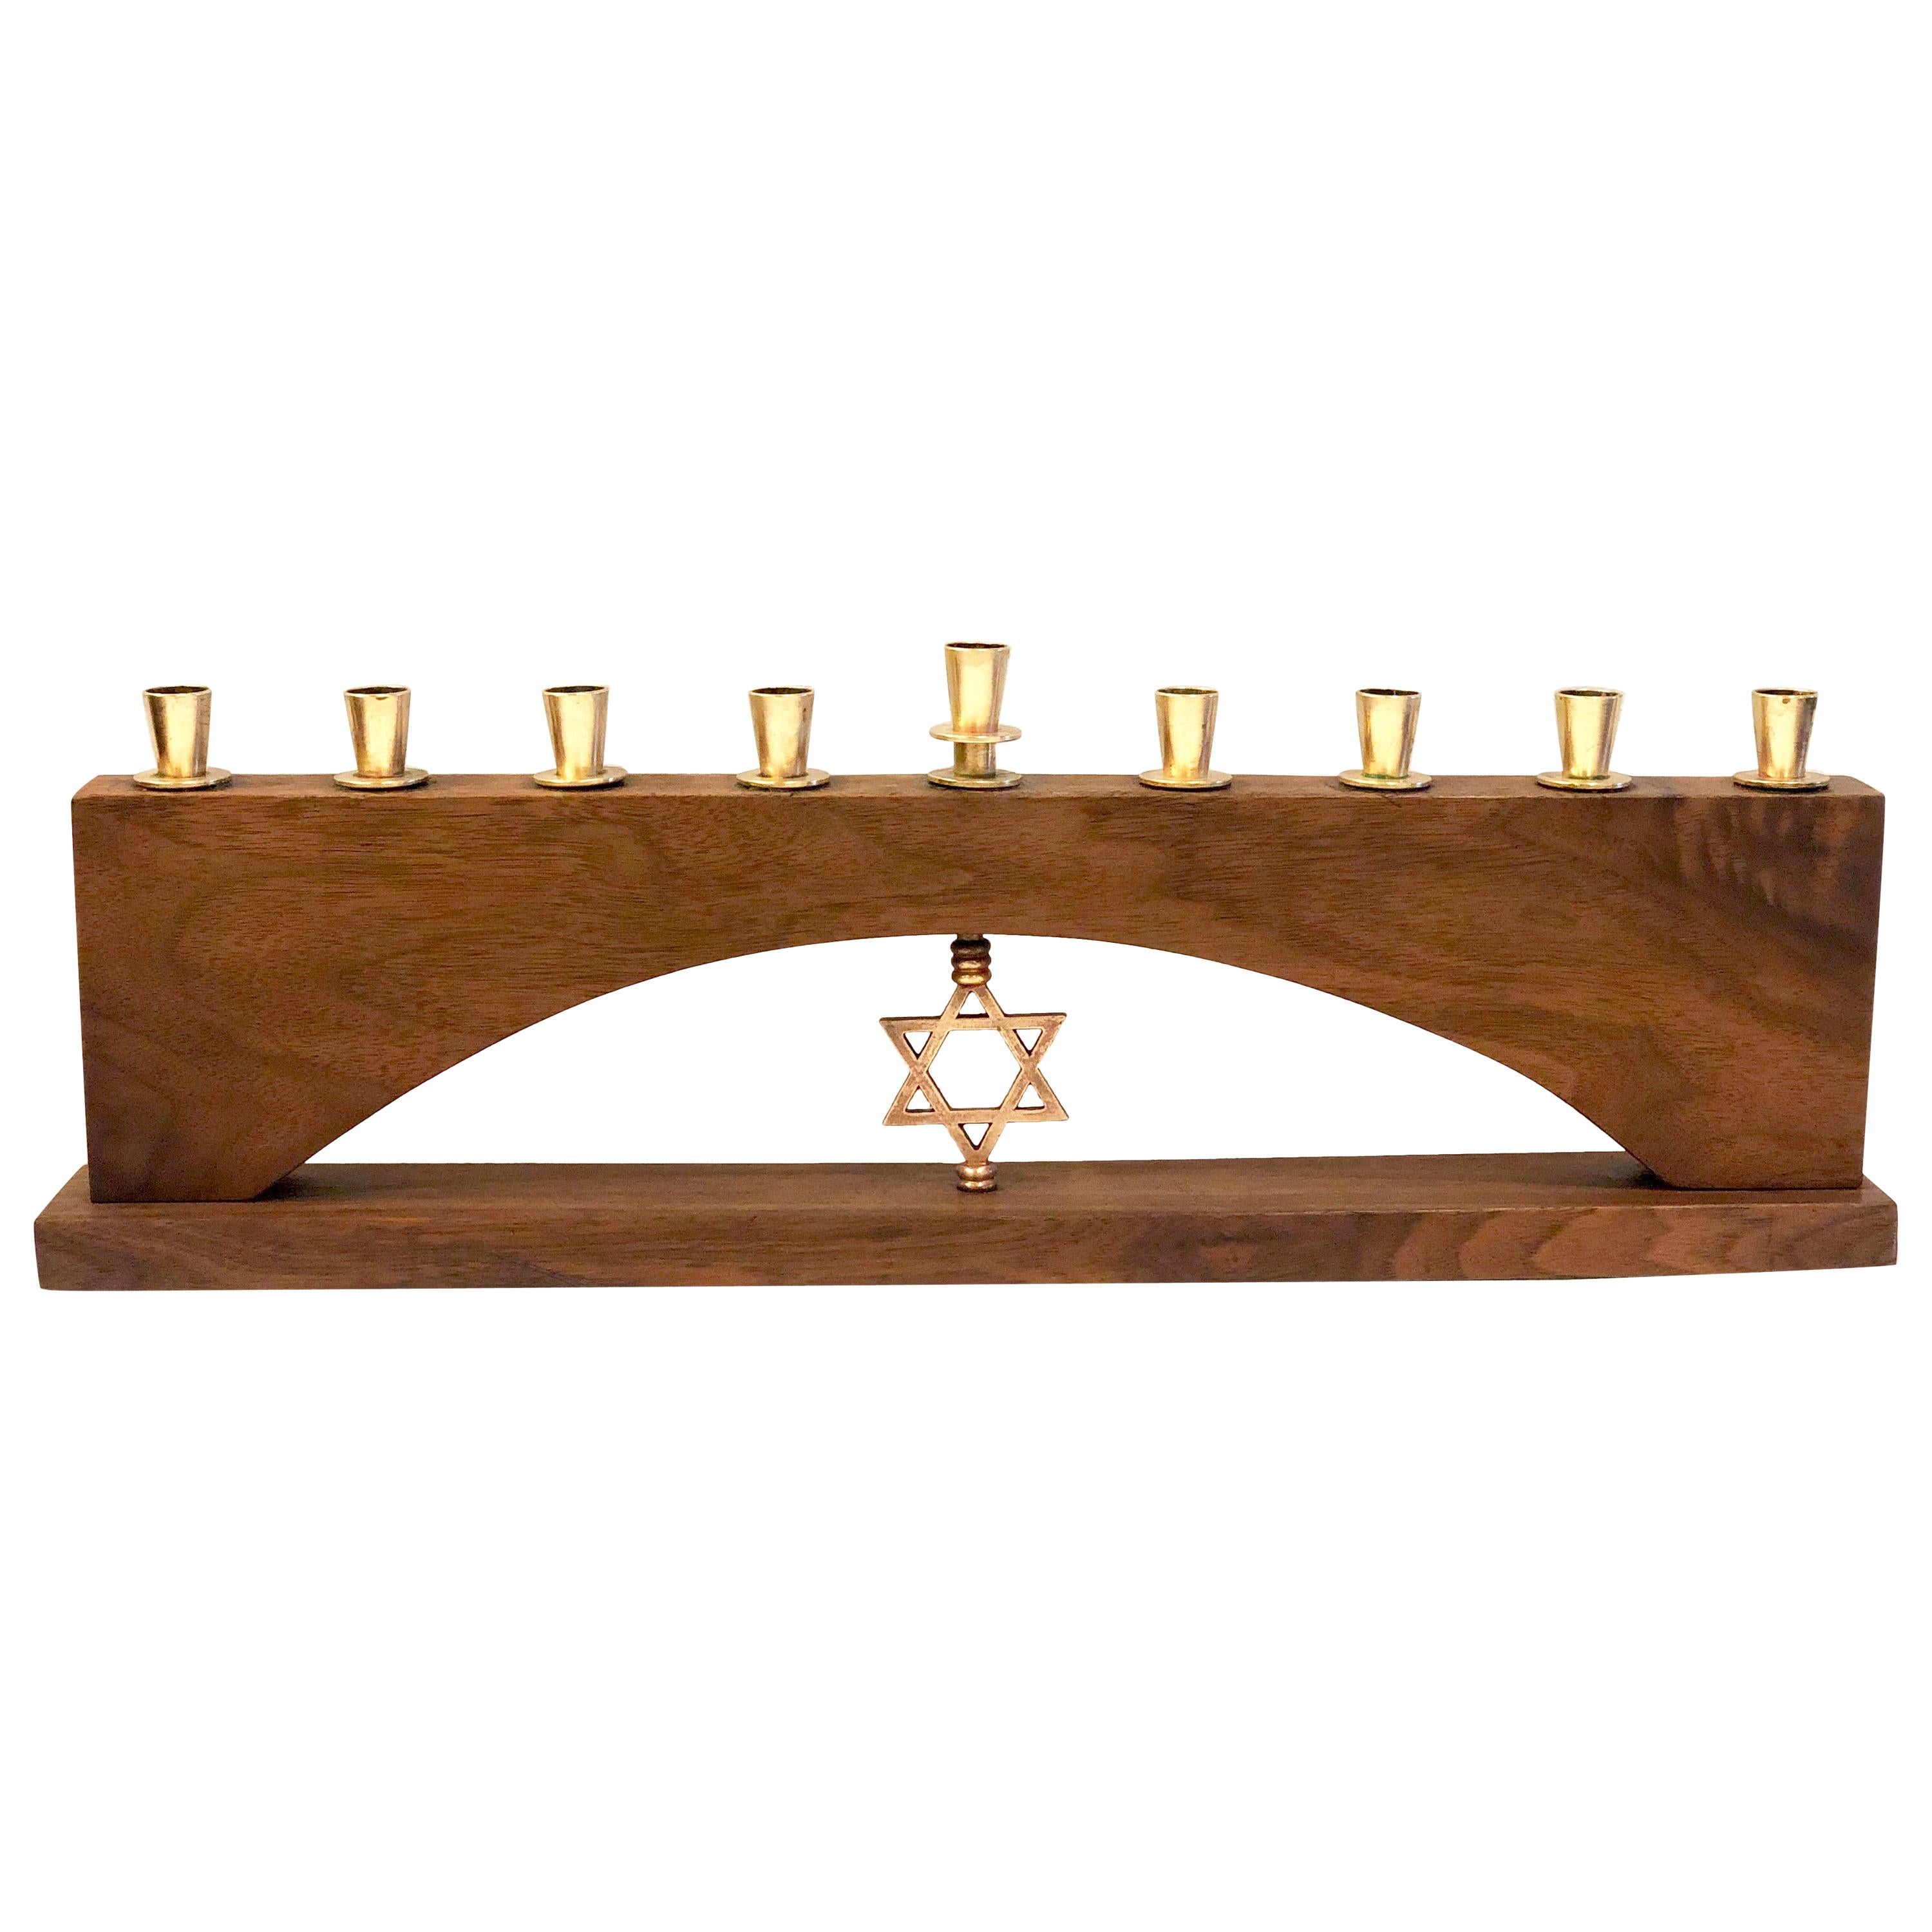 Solid walnut and polished brass candleholders Menorah attributed to Paul Evans, circa 1950s we cleaned and oiled the piece its in nice original condition.